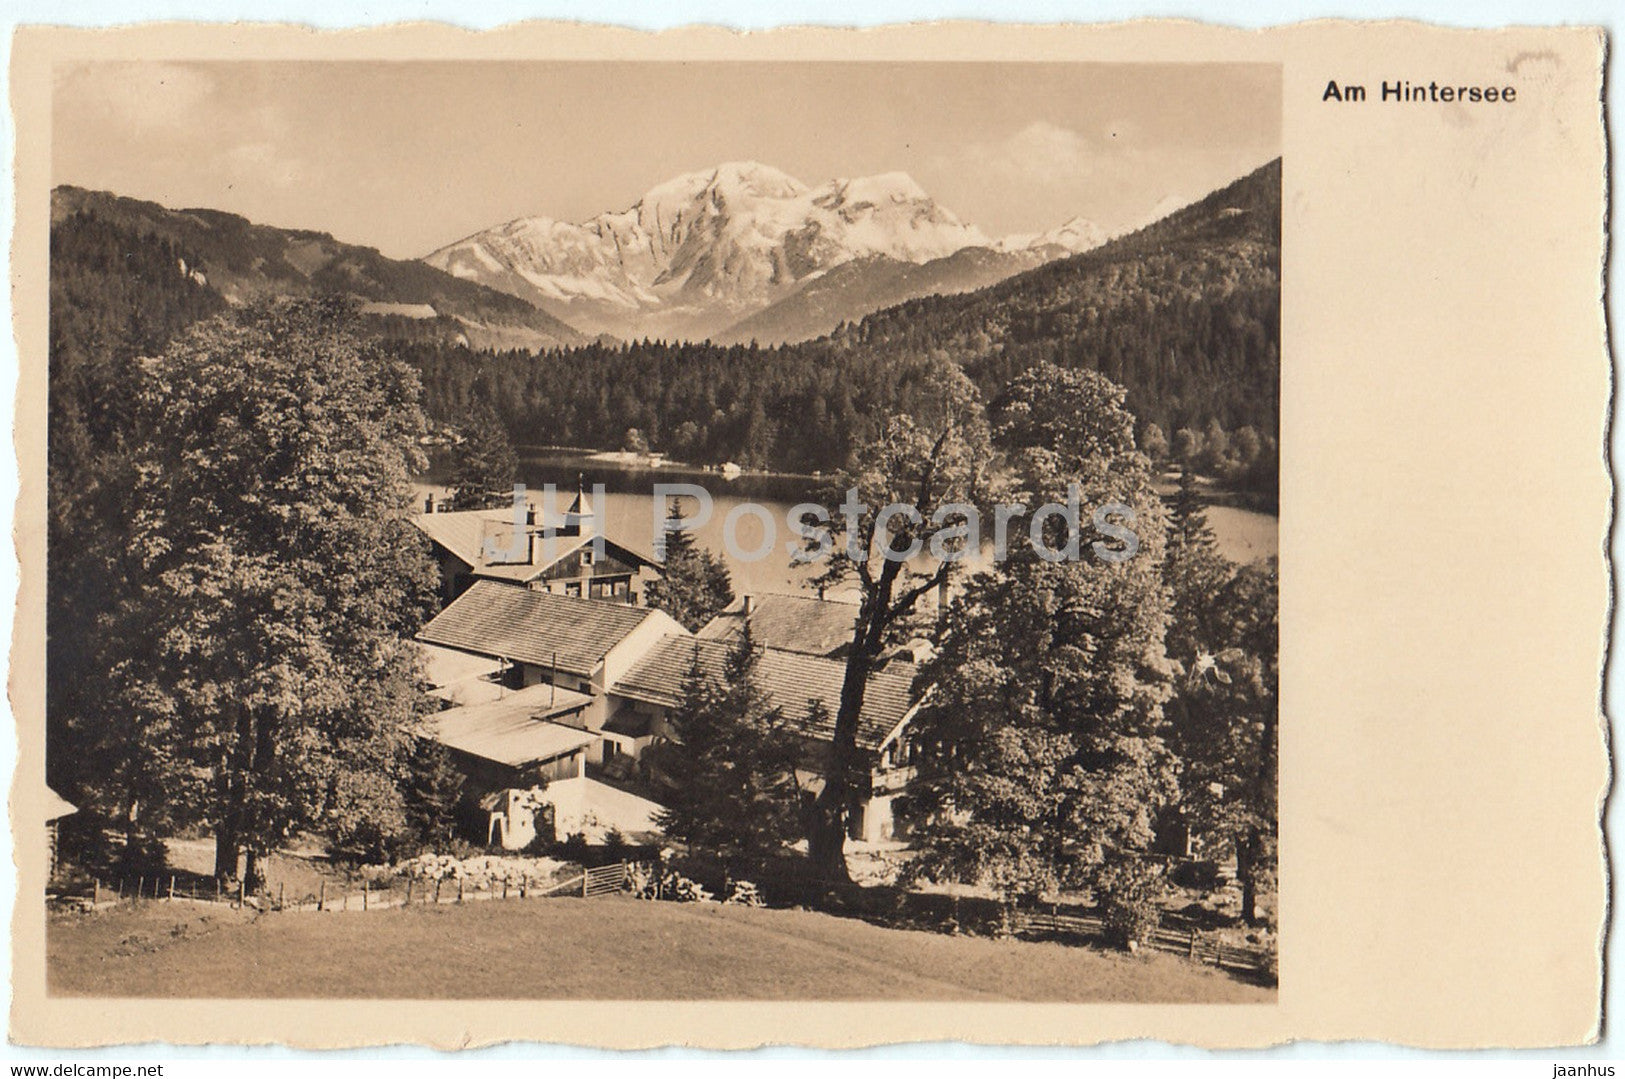 Am Hintersee - Das Berchtesgaden Land - Hotel Post am Hintersee 800 m - 262 - old postcard - Germany - unused - JH Postcards